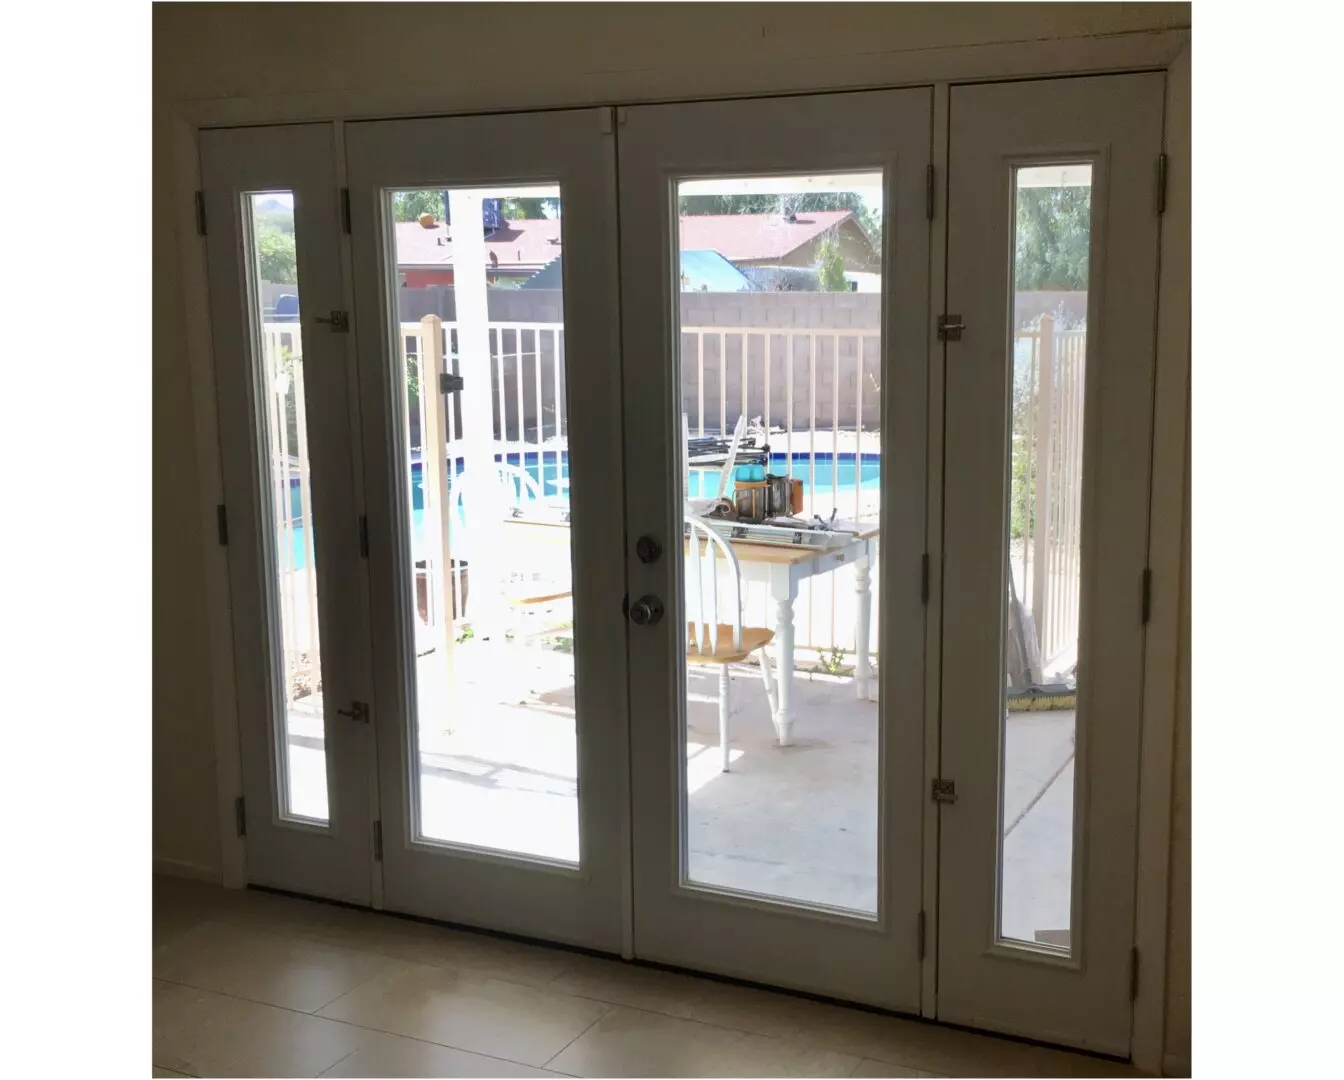 A picture of large doors overlooking the pool